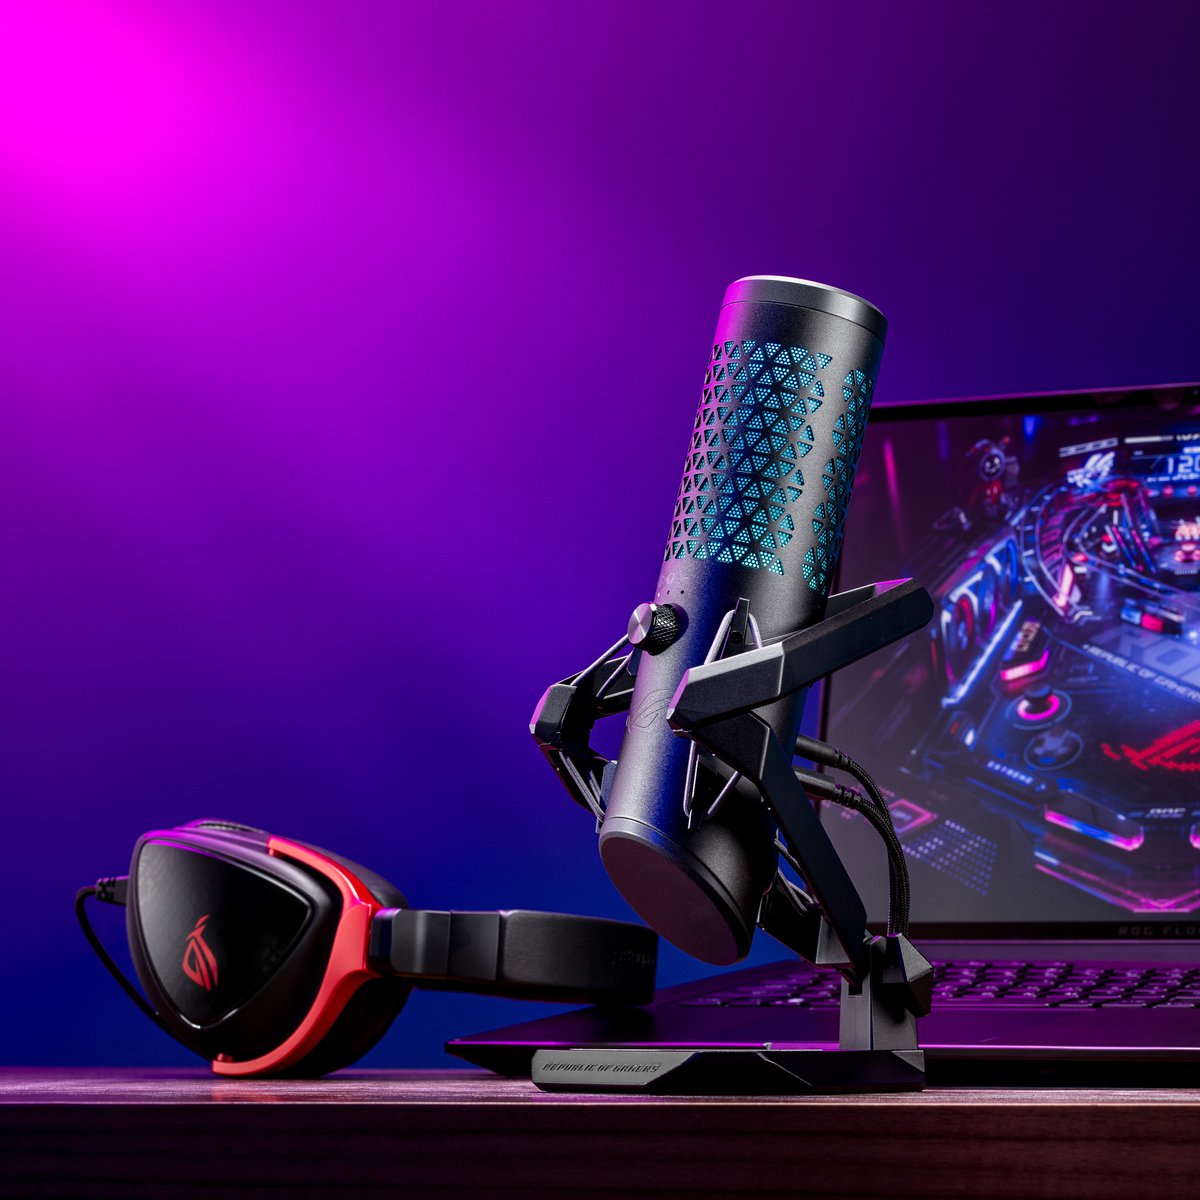 Choose right, left, or both? 😉​ #ROGCarnyx offers real-time monitoring with a 3.5 mm headset jack, you don’t have to worry about missing anything.🎙️​ Game on! rog.gg/Carnyx​ #ROGPeripheral​ #ROGGamingMicrophone​ #ROGUSBMicrophone